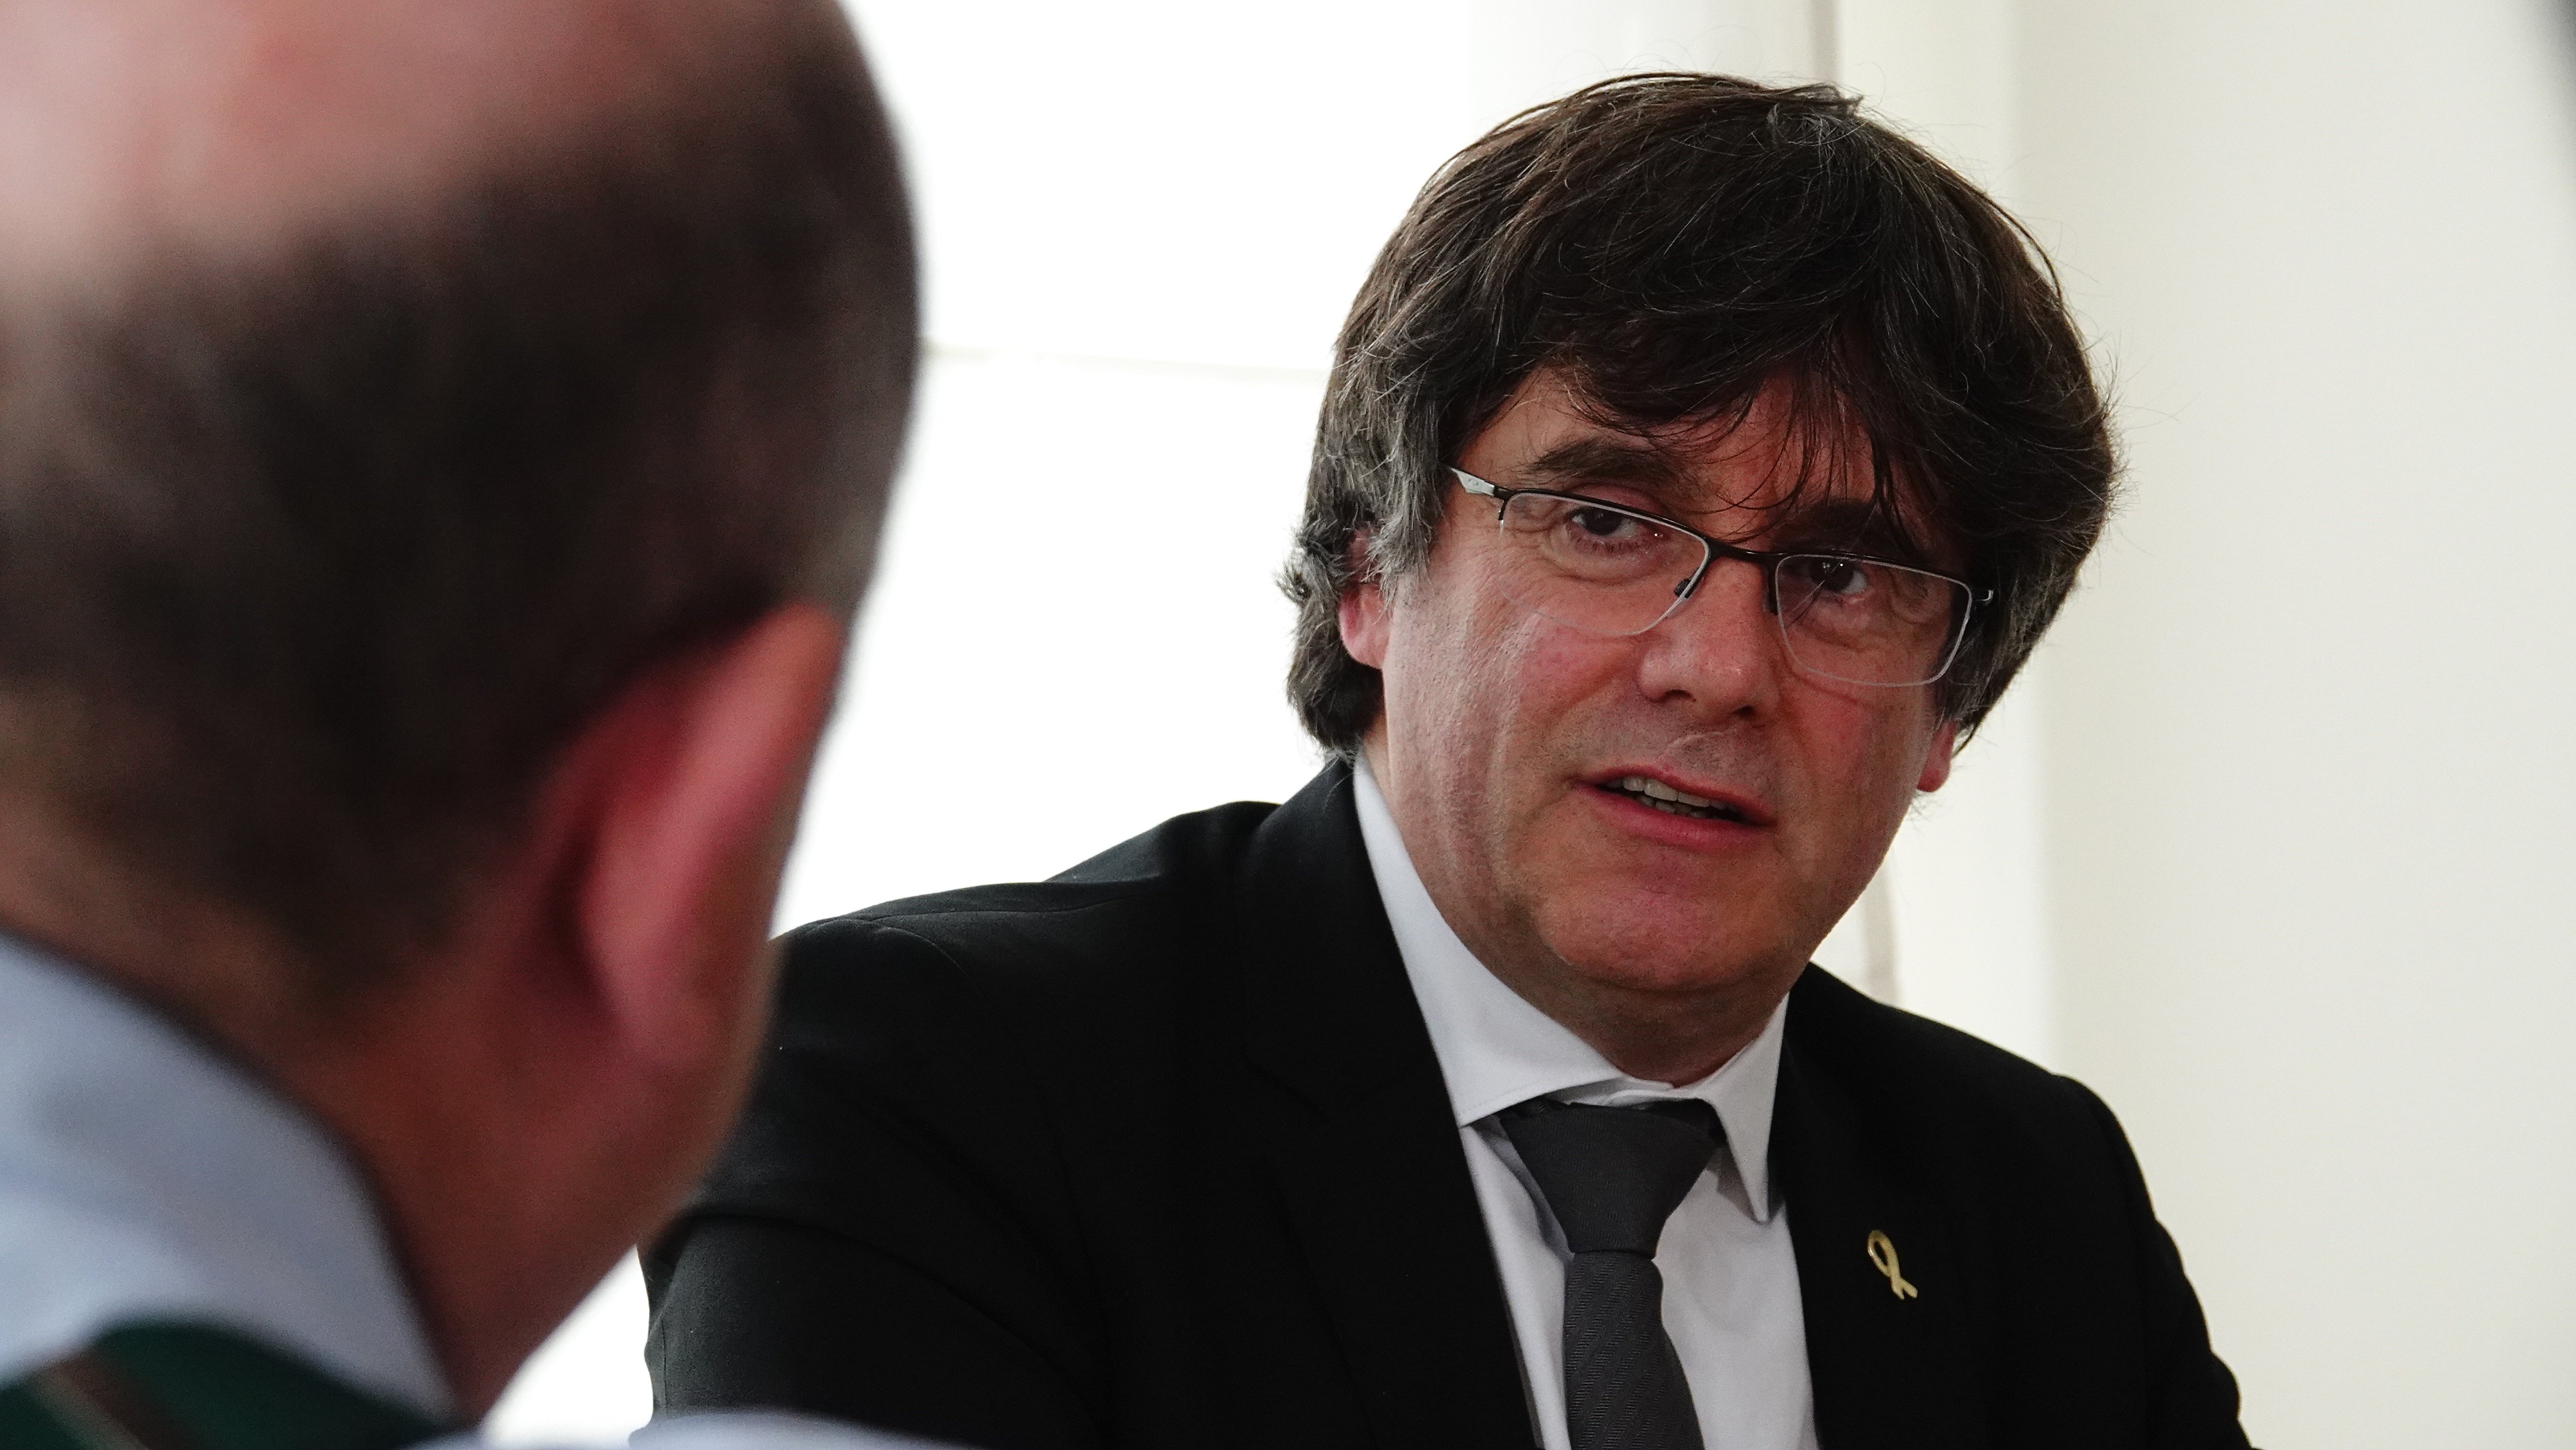 Puigdemont: "They've tried to block us in a very botched way"